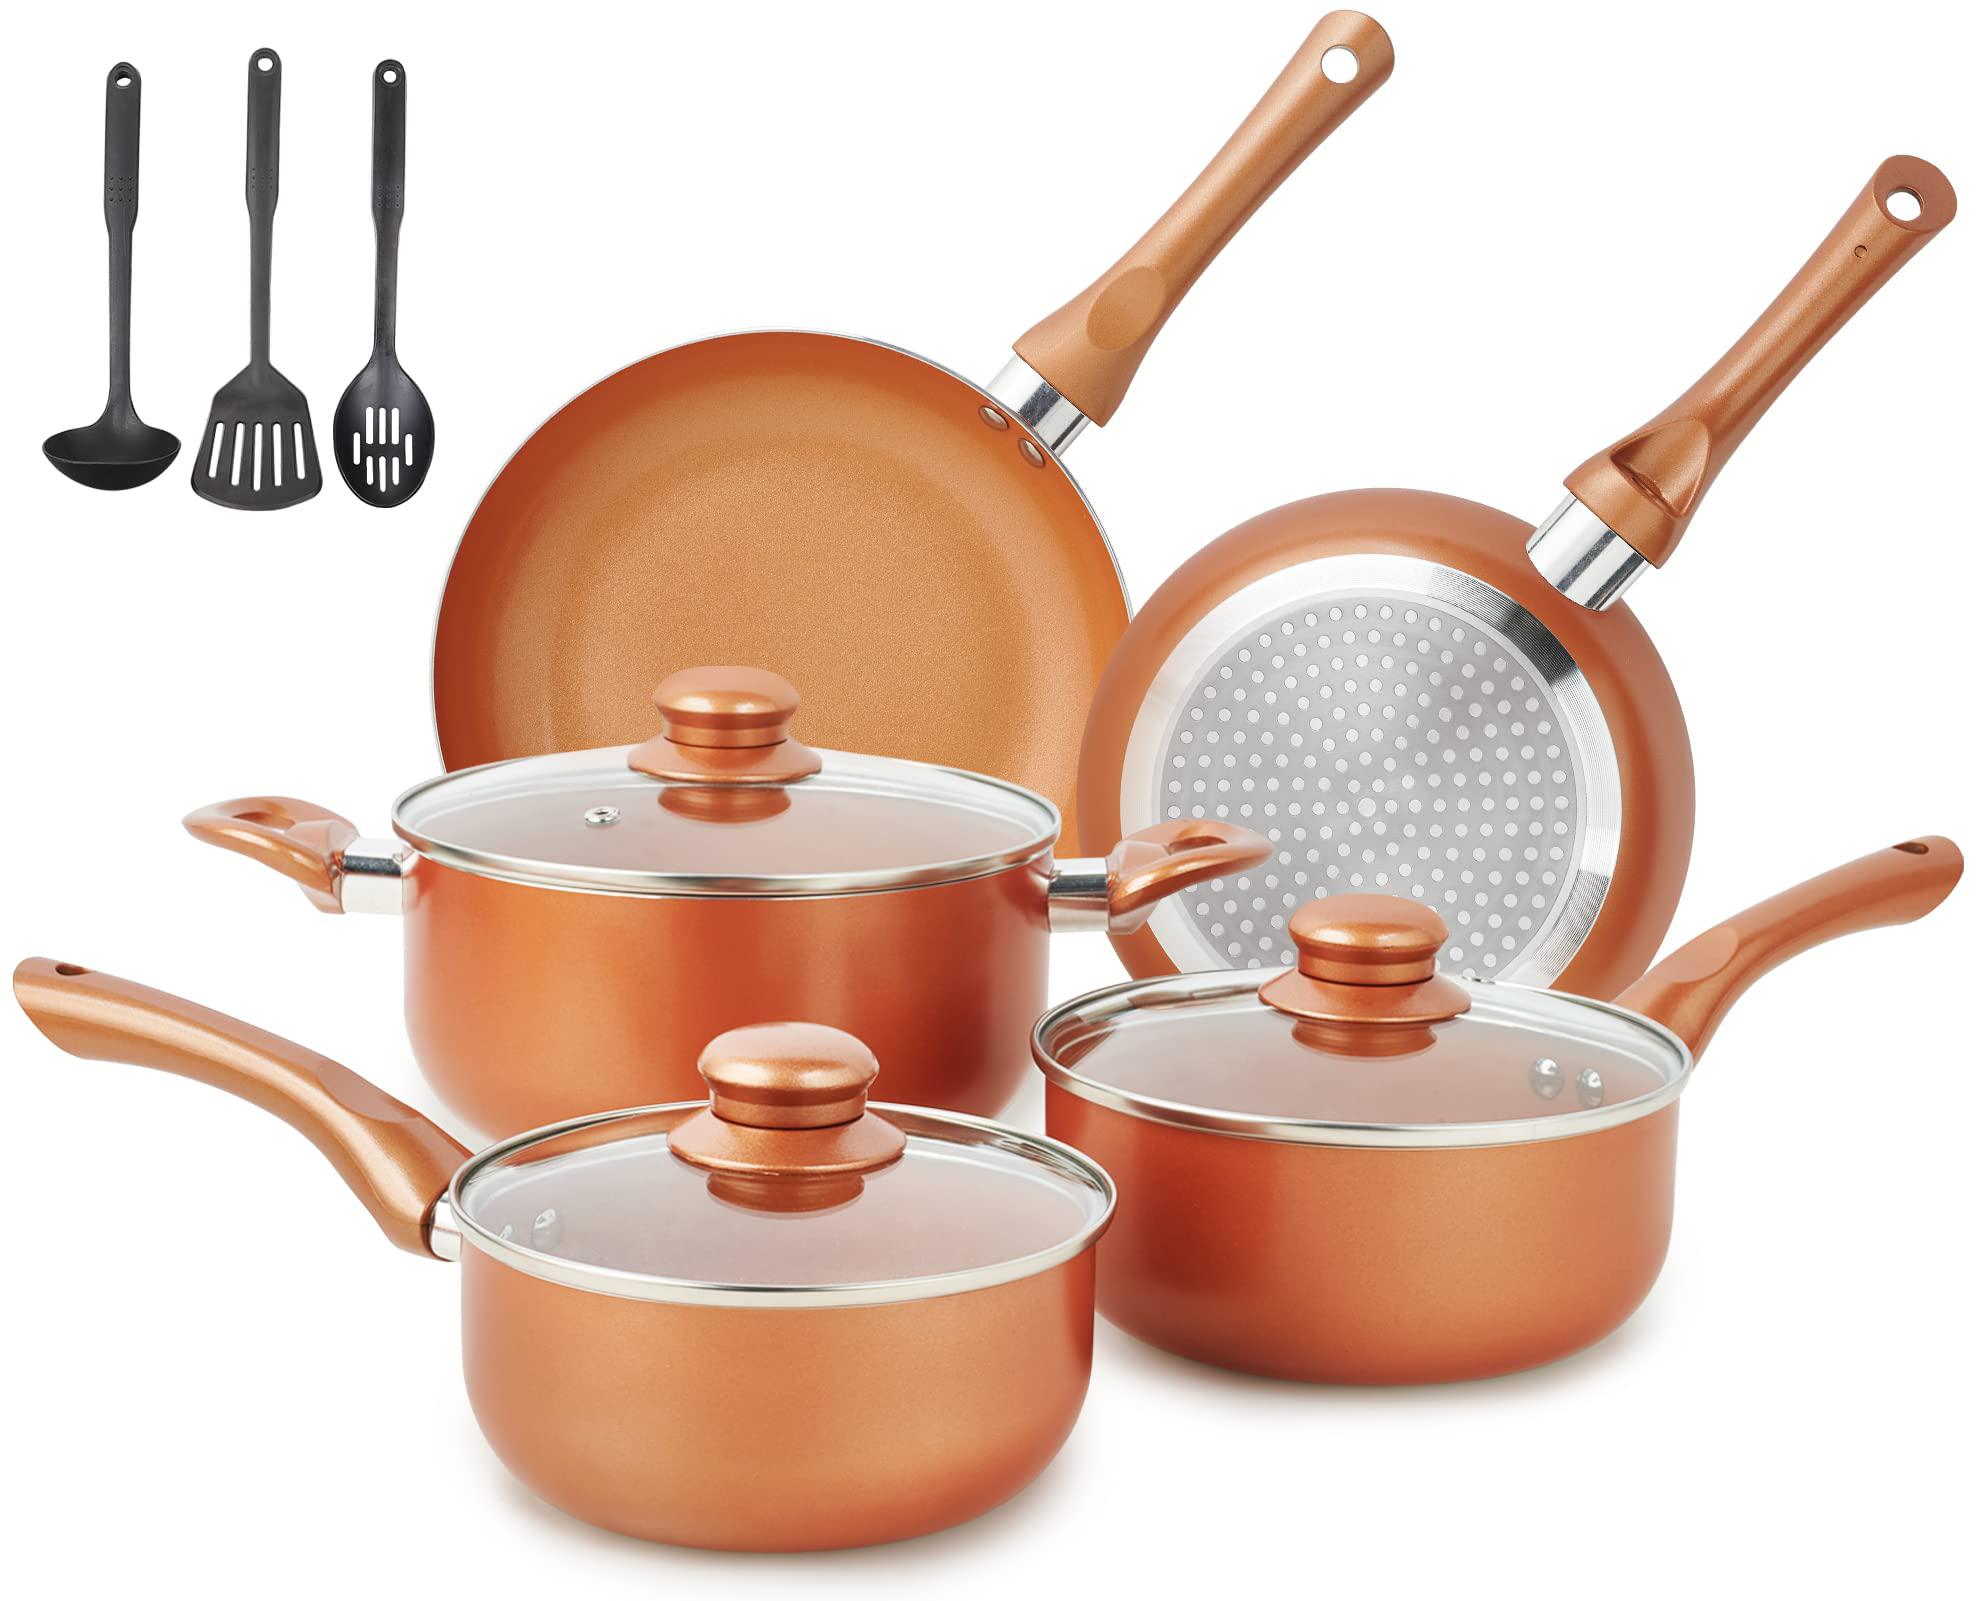 M MELENTA Pots and Pans Set copper, Pre-Installed Nonstick cookware Set with ceramic coating, 11 Piece cookware with Kitchen Utensils, gas